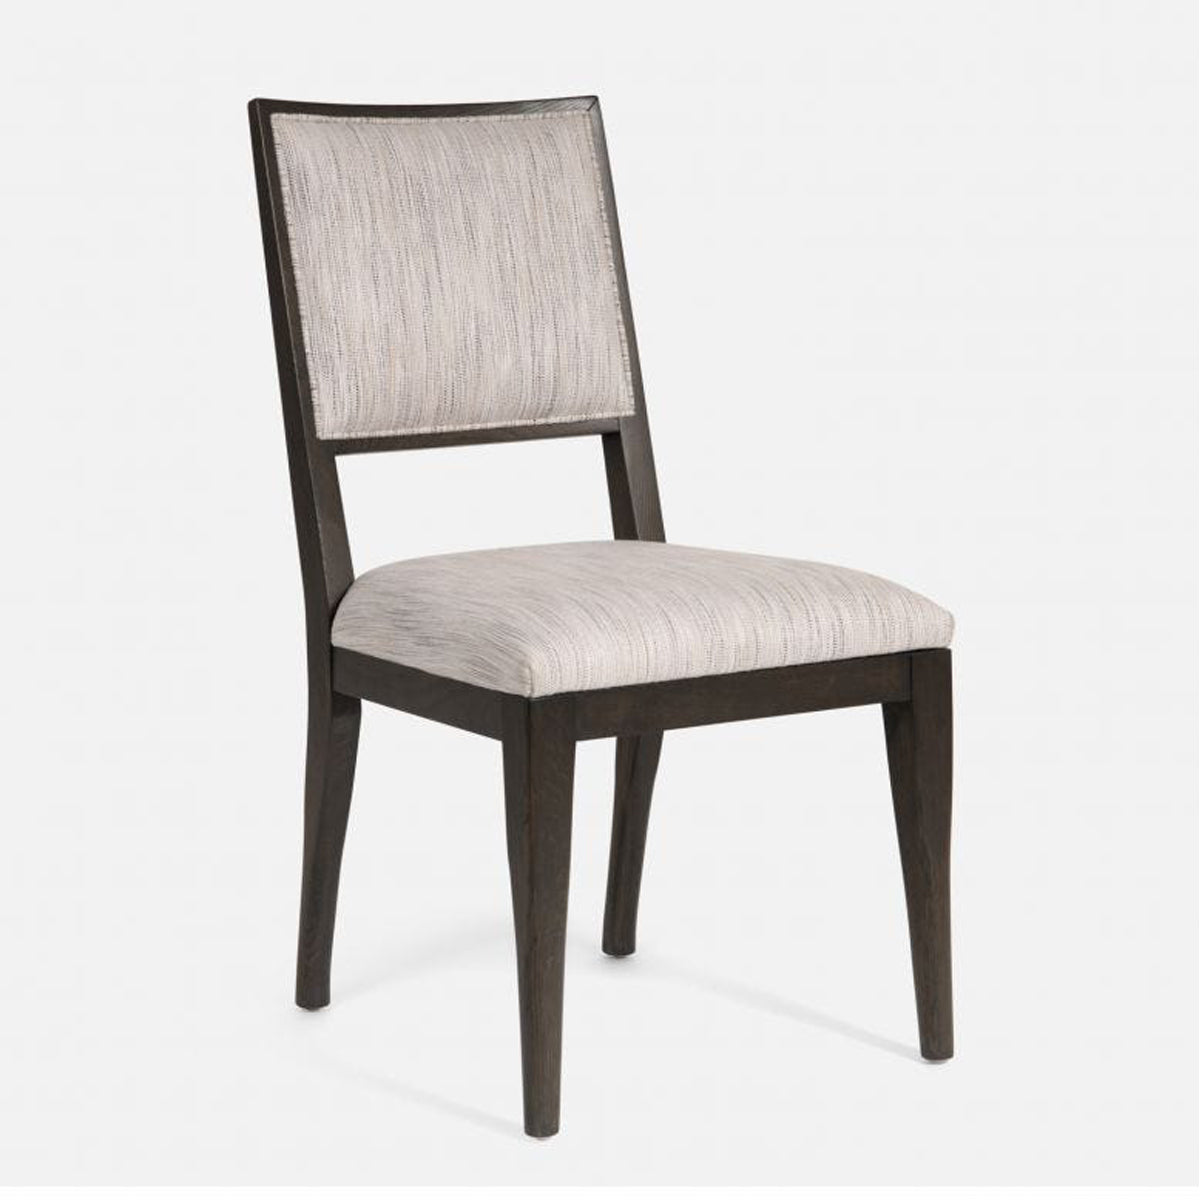 Made Goods Nelton Upholstered Dining Chair in Mondego Cotton Jute